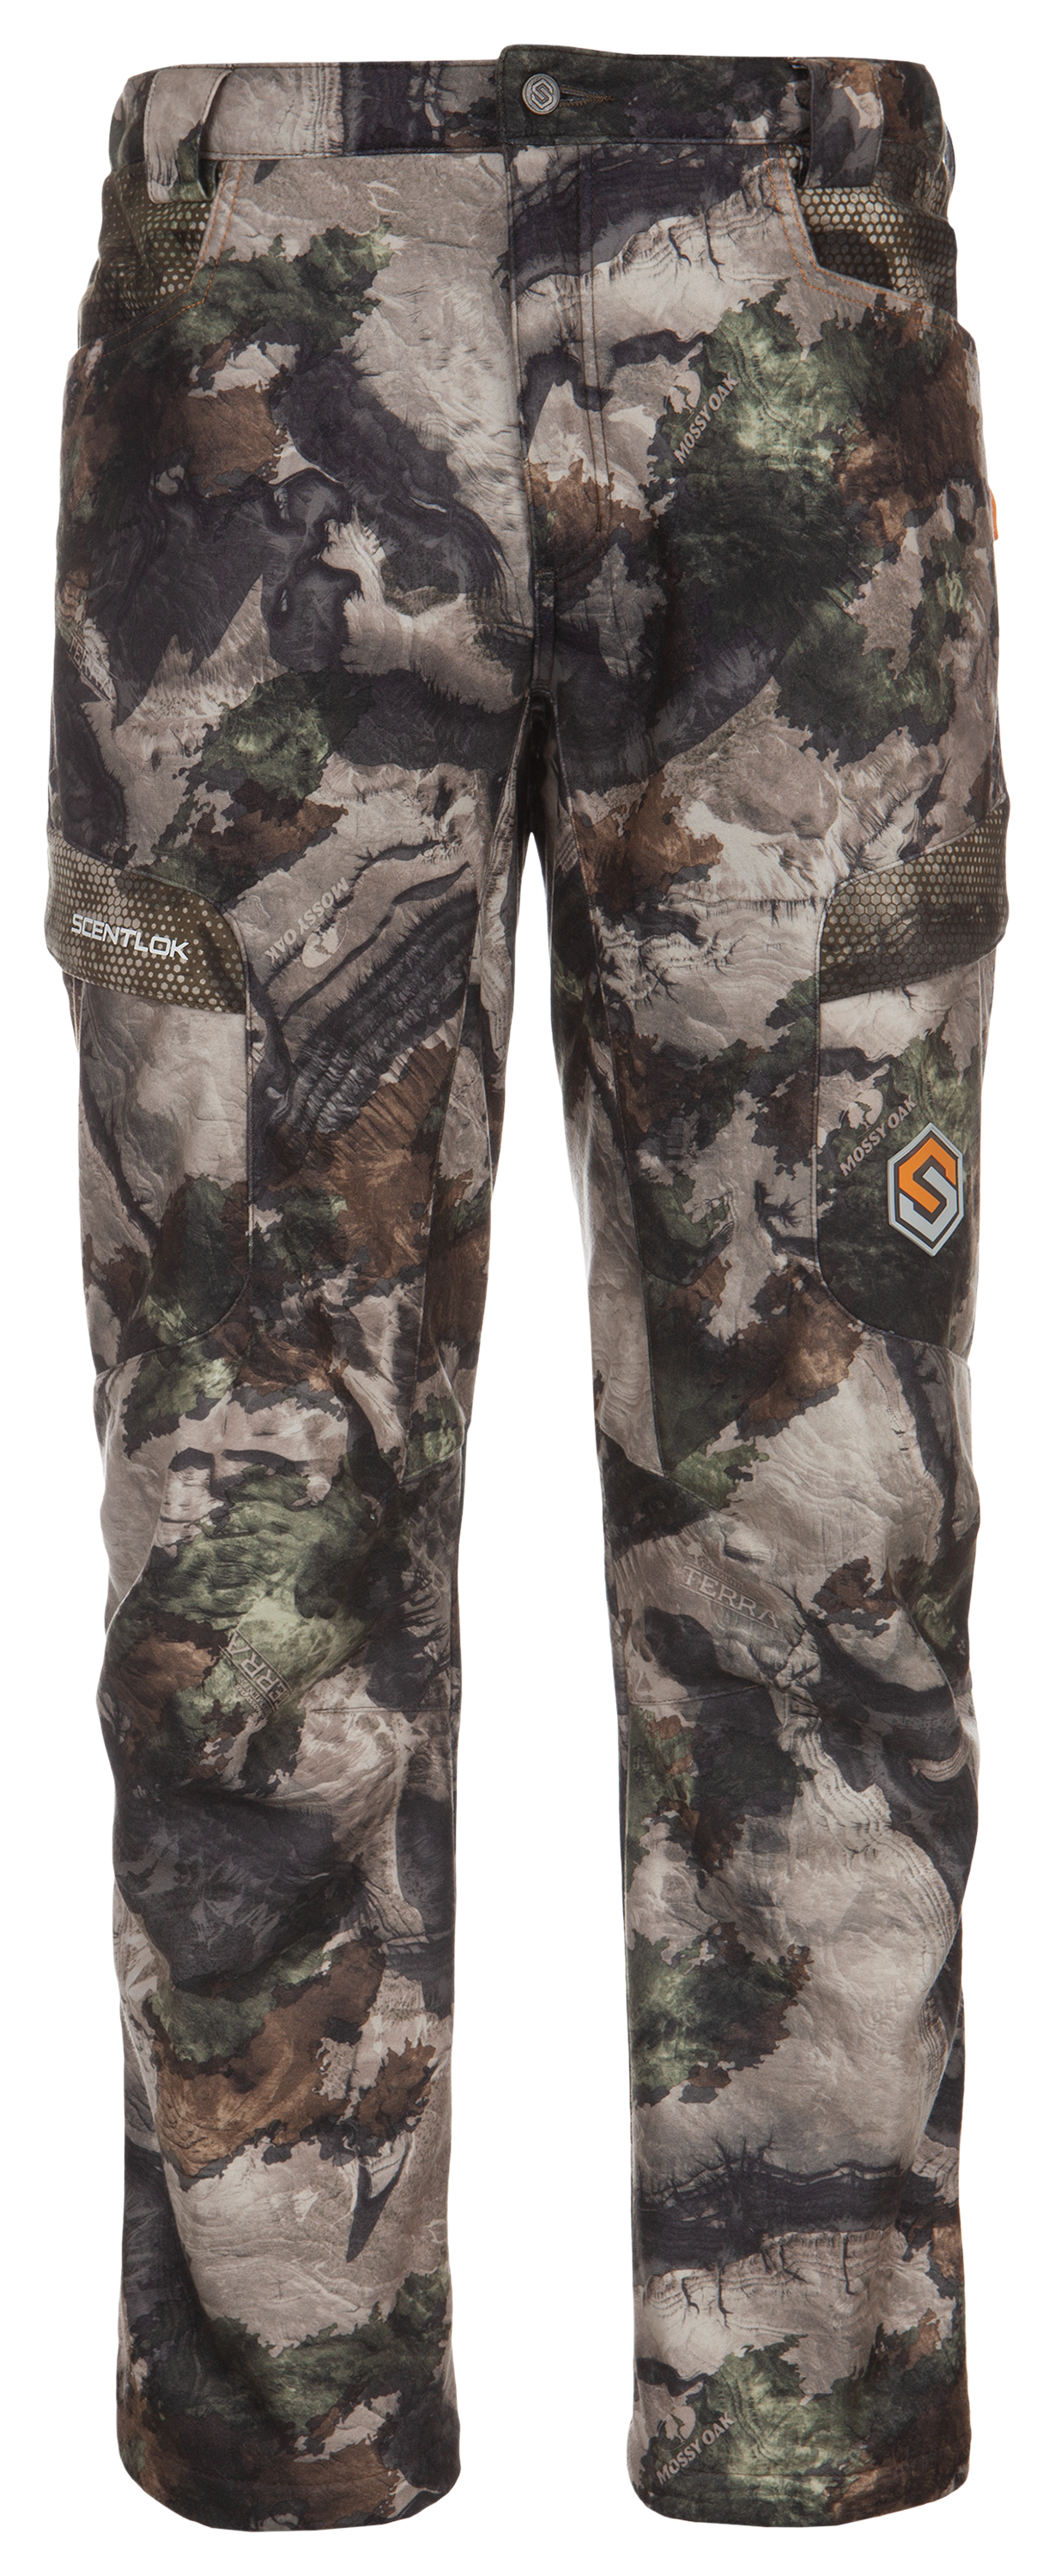 Scent Control Hunting Clothing for Men